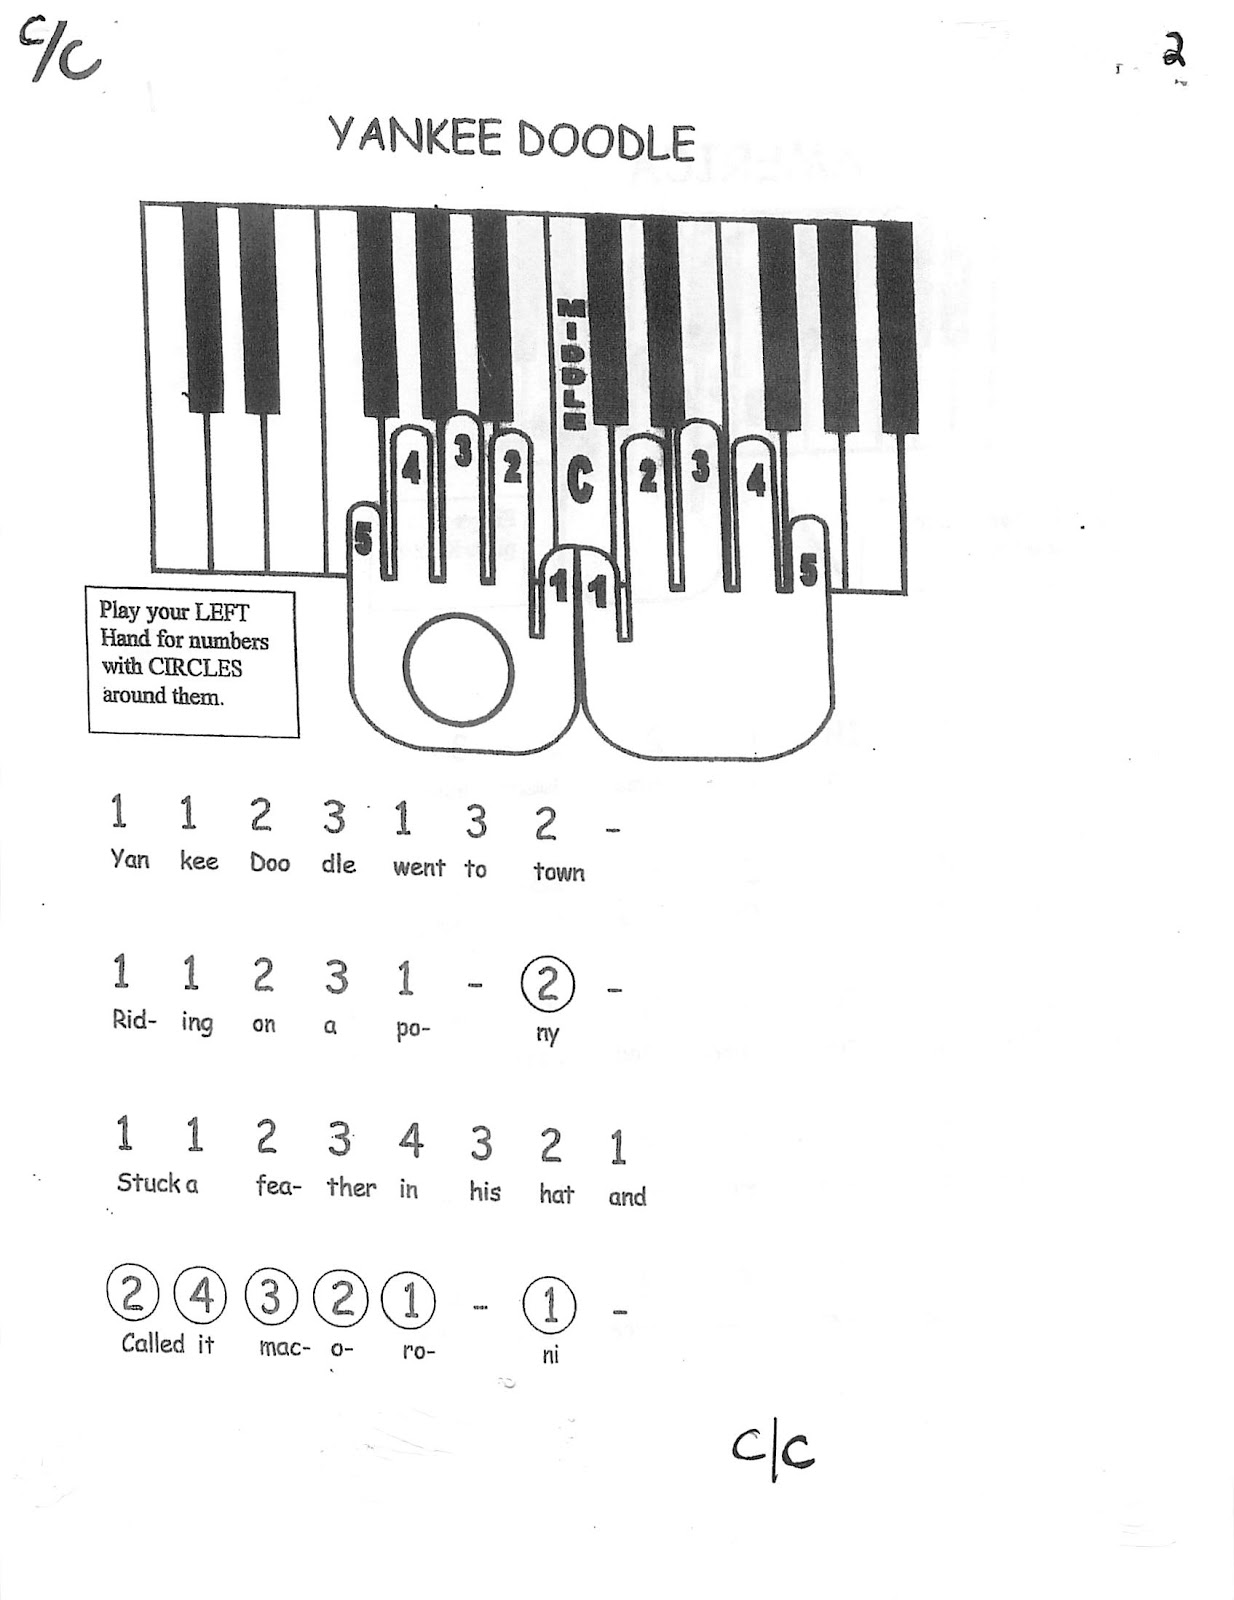 miss-jacobson-s-music-easy-keyboard-1-melody-songs-by-frame-and-finger-number-1